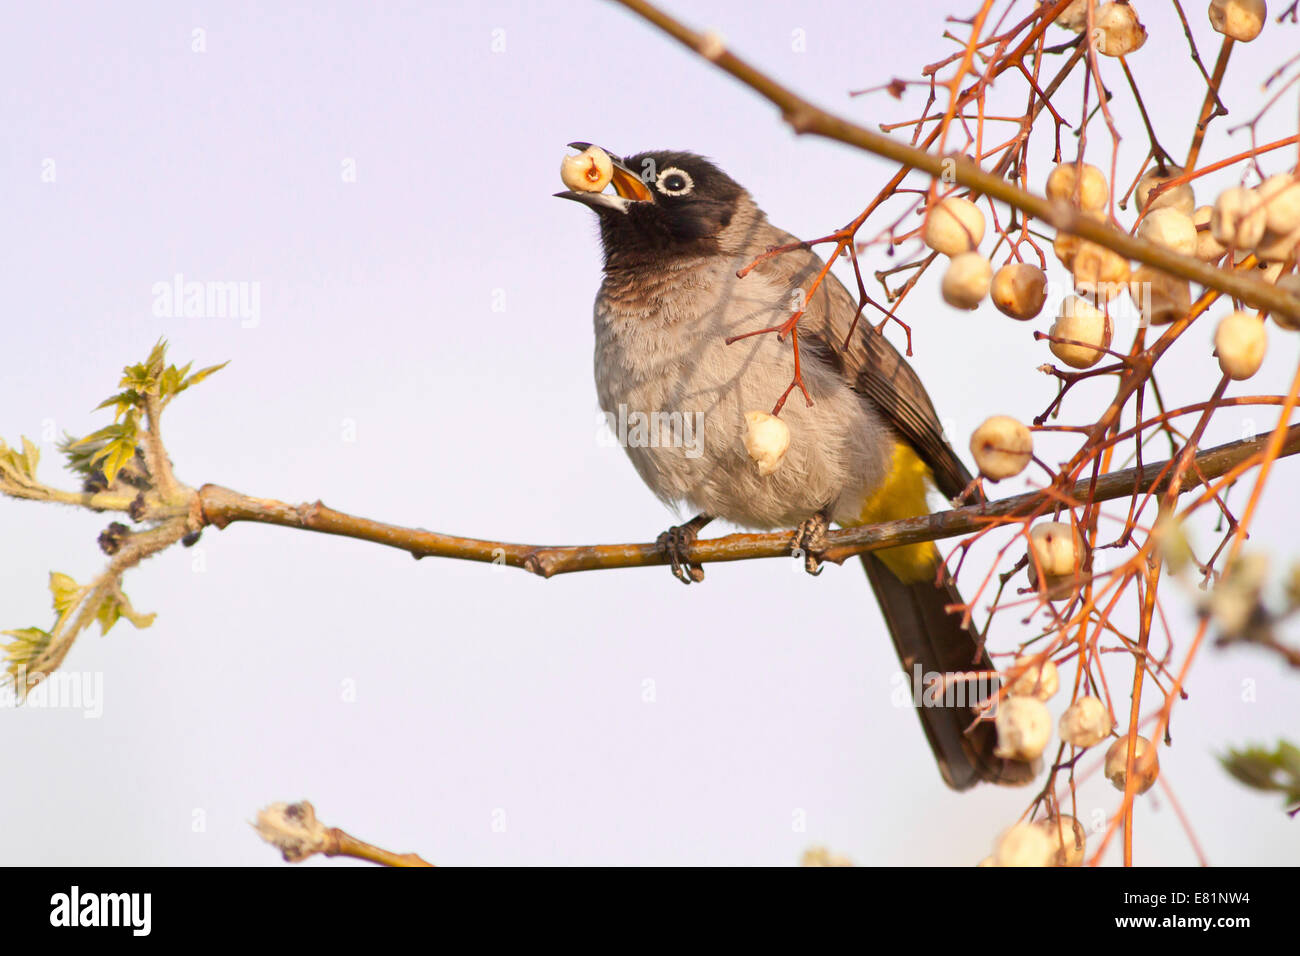 White-spectacled Bulbul or Yellow-vented Bulbul (Pycnonotus xanthopygos) eating berries on a branch, Antalya, Turkey Stock Photo